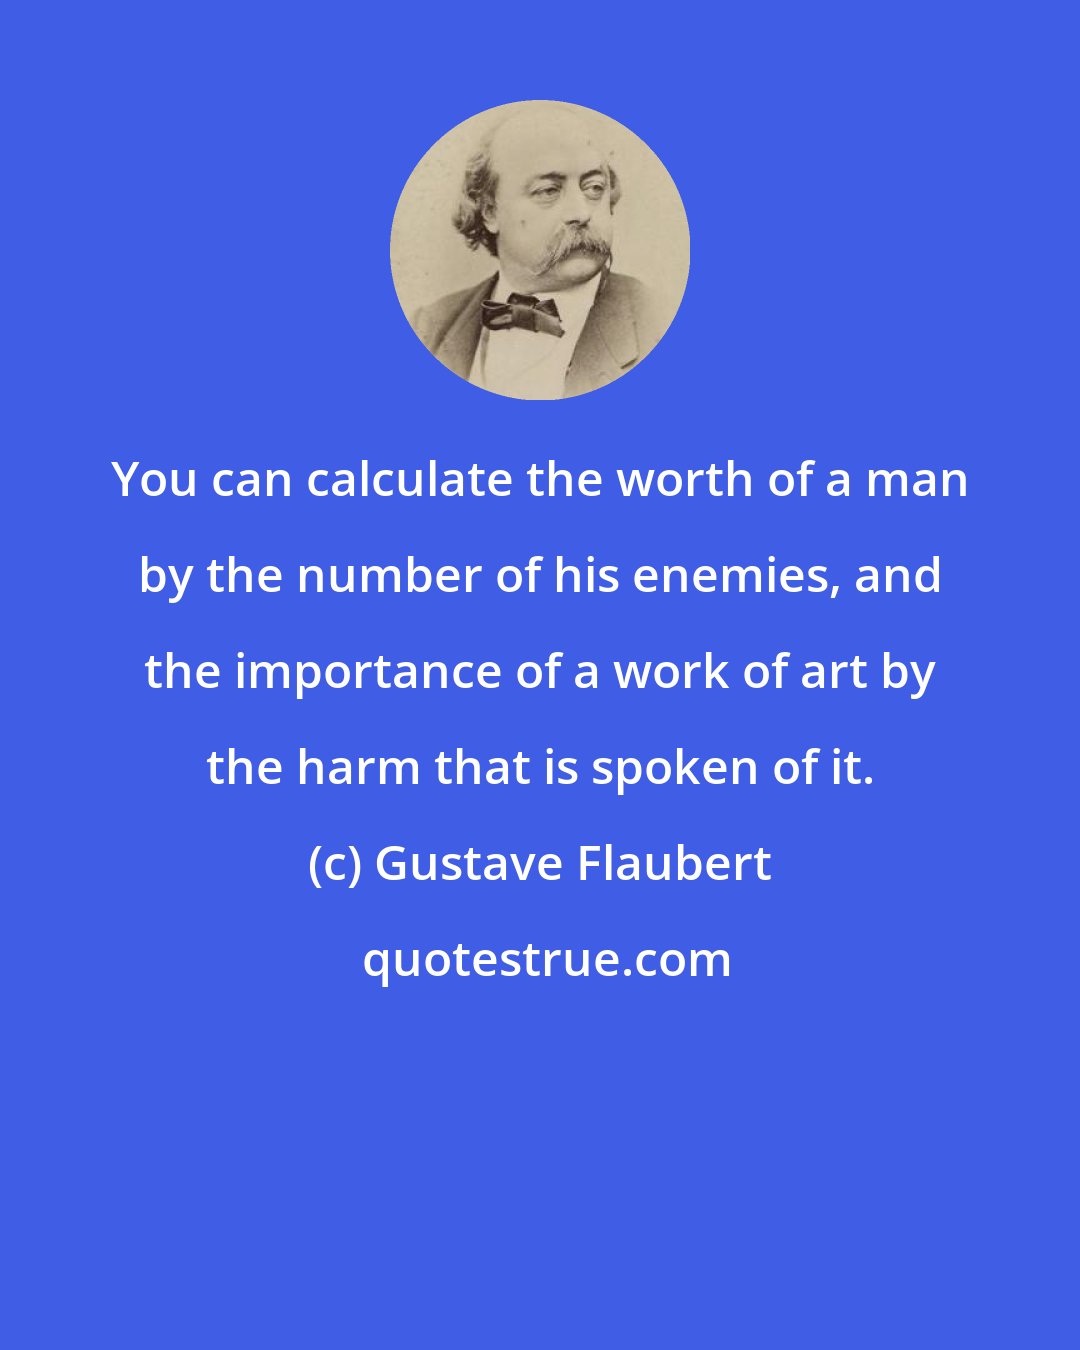 Gustave Flaubert: You can calculate the worth of a man by the number of his enemies, and the importance of a work of art by the harm that is spoken of it.